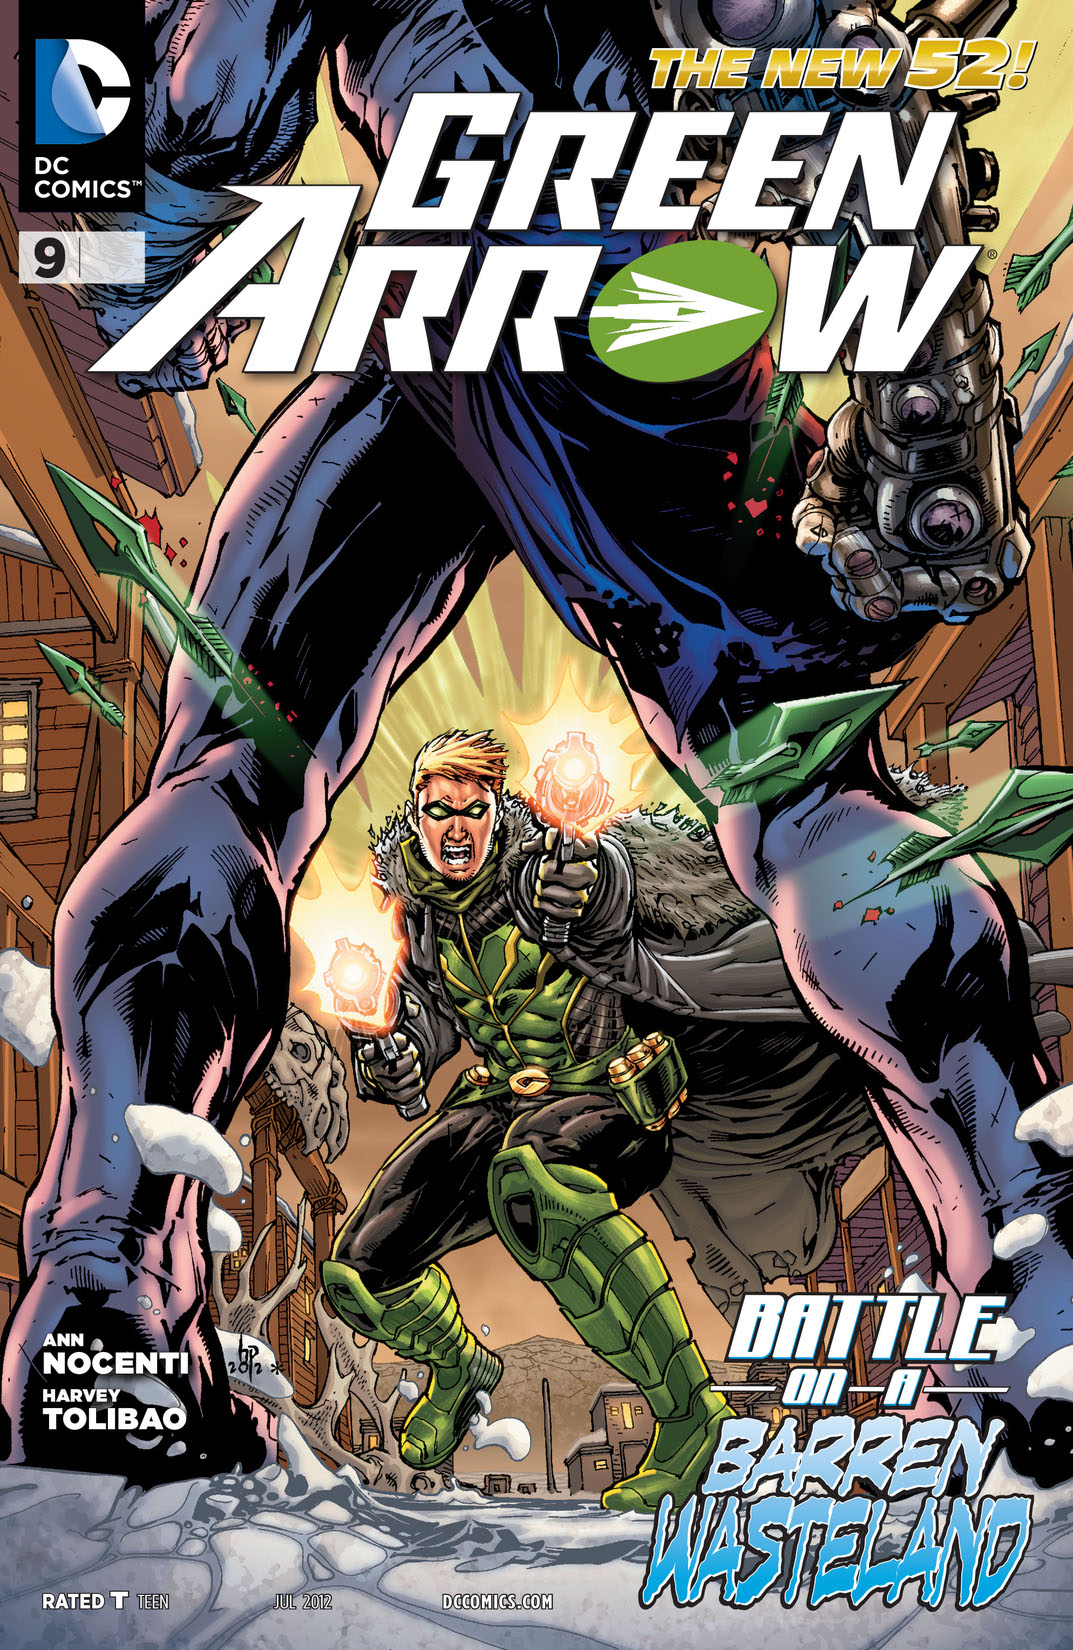 Green Arrow (2011-) #9 preview images